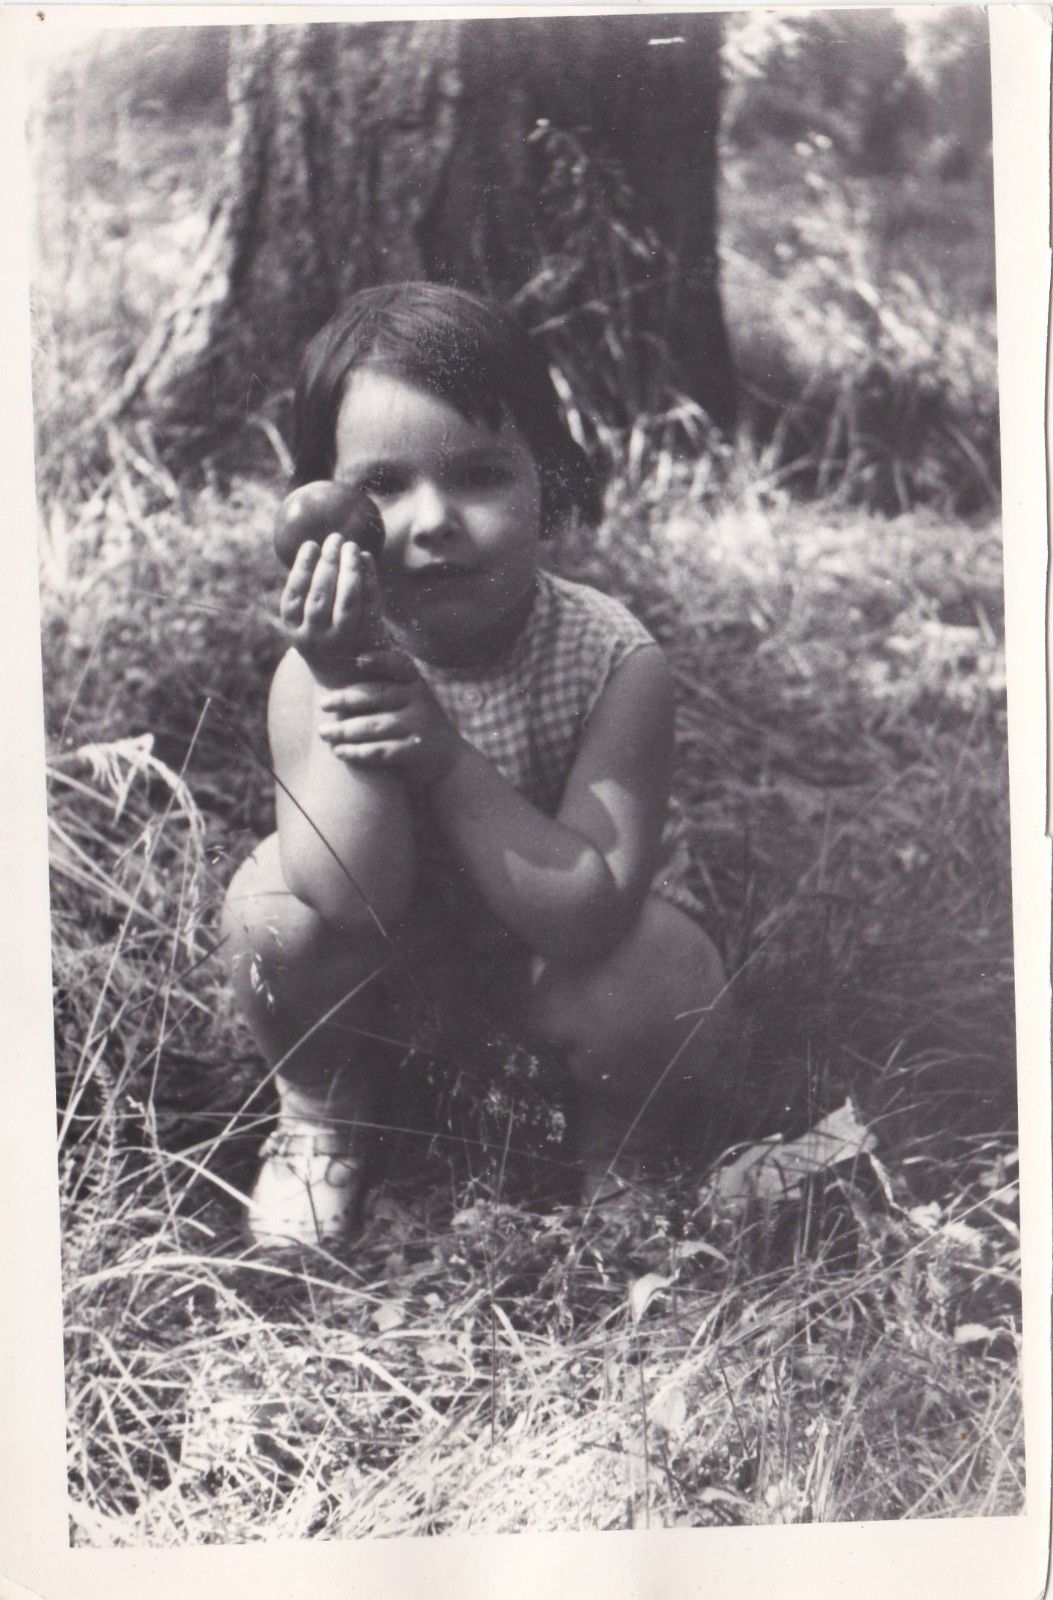 russian girl 1975 holds piece of fruit